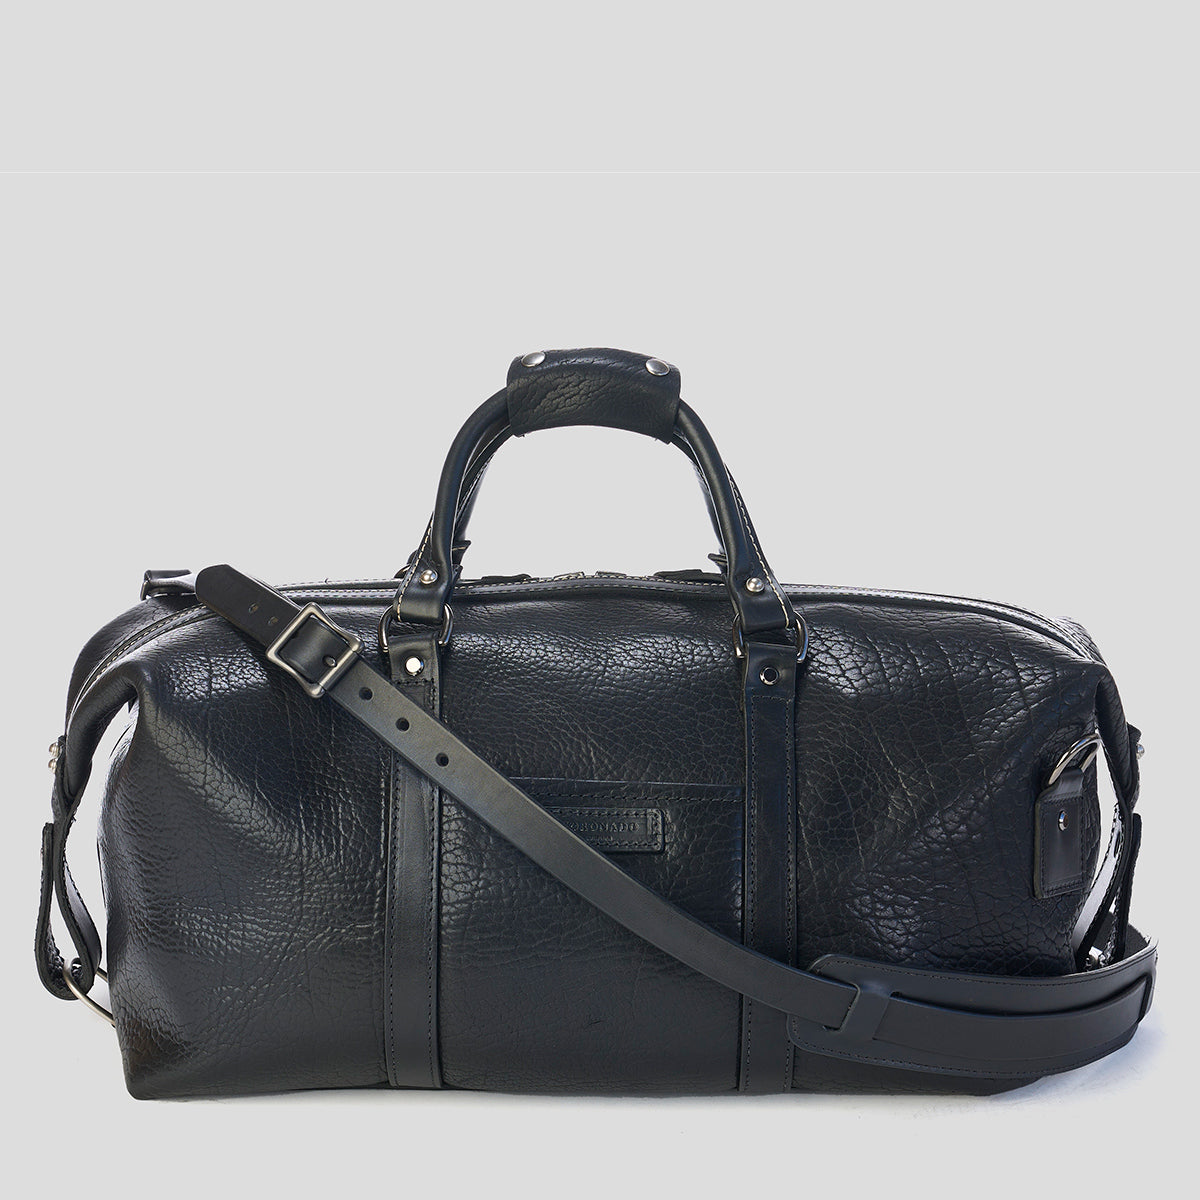 Meteor Travel Bag 50 Other Leathers - Travel M22634